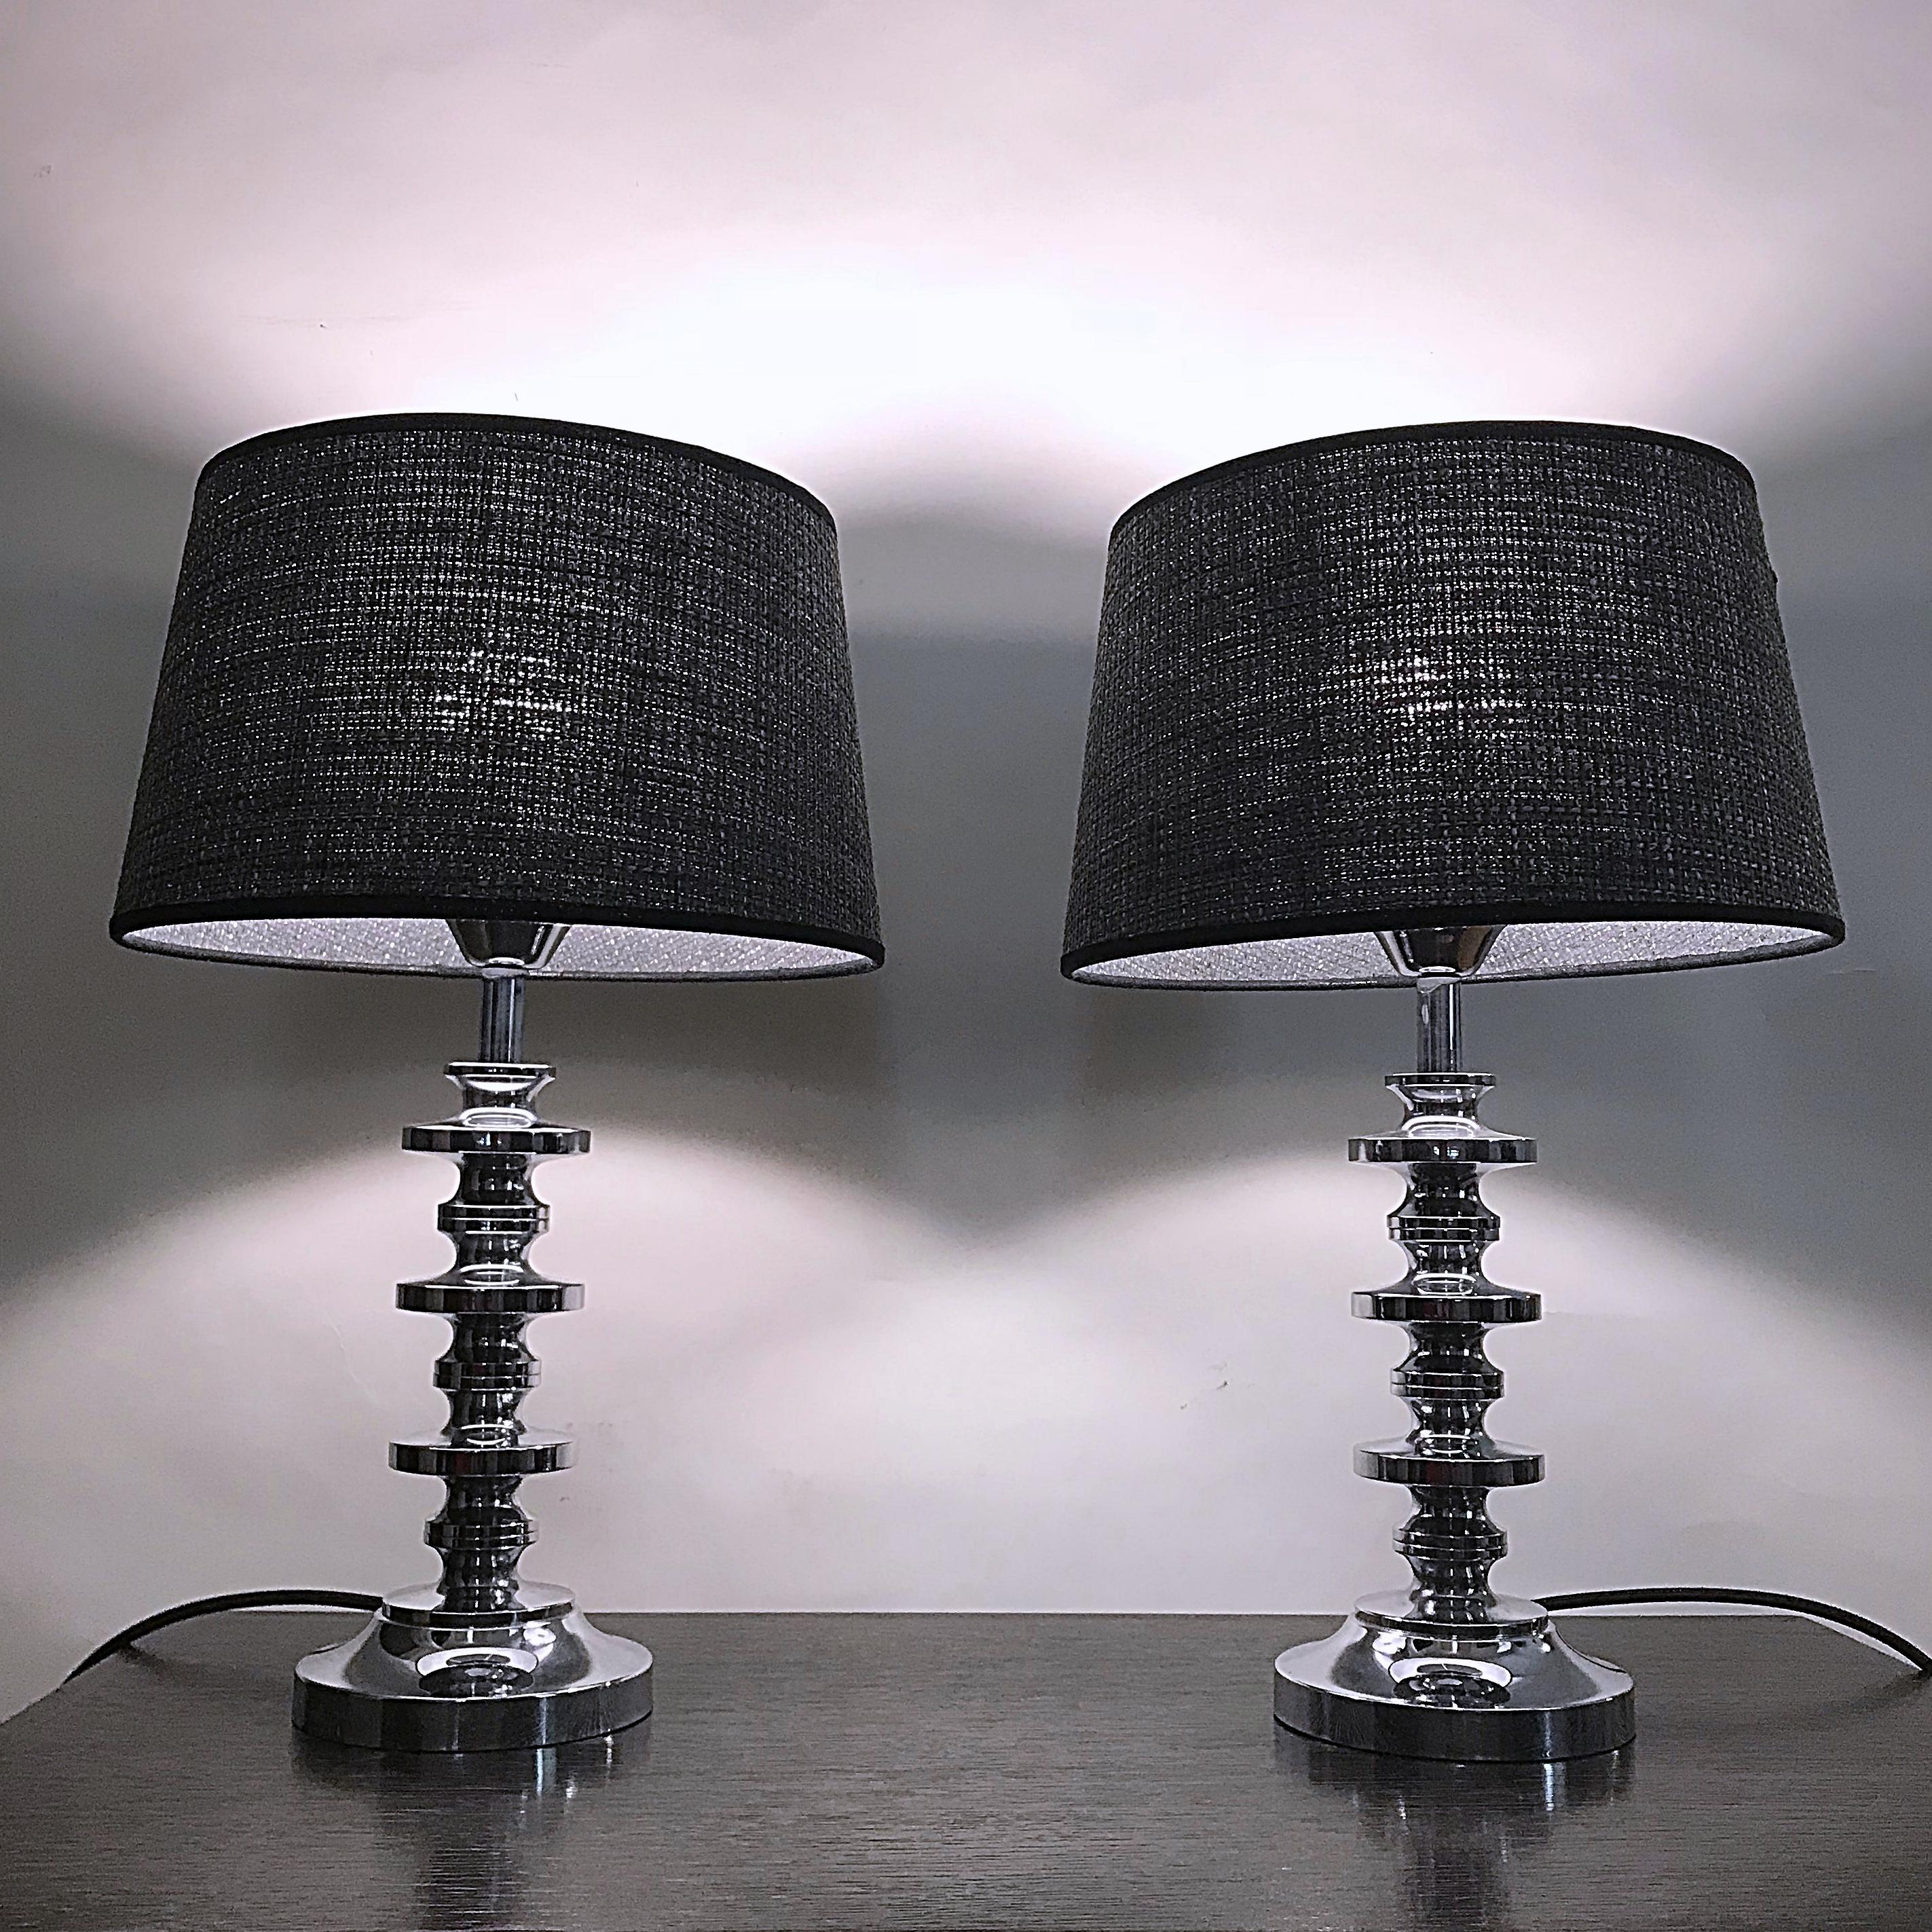 Pair of Italian Mid-Century Modern table lamps attributed to Gaetano Sciolari. The lamps are made of very heavy polished massive steel in high quality. The shades are handmade of Chanel fabric and provide a large-area light. Newly rewired and tested